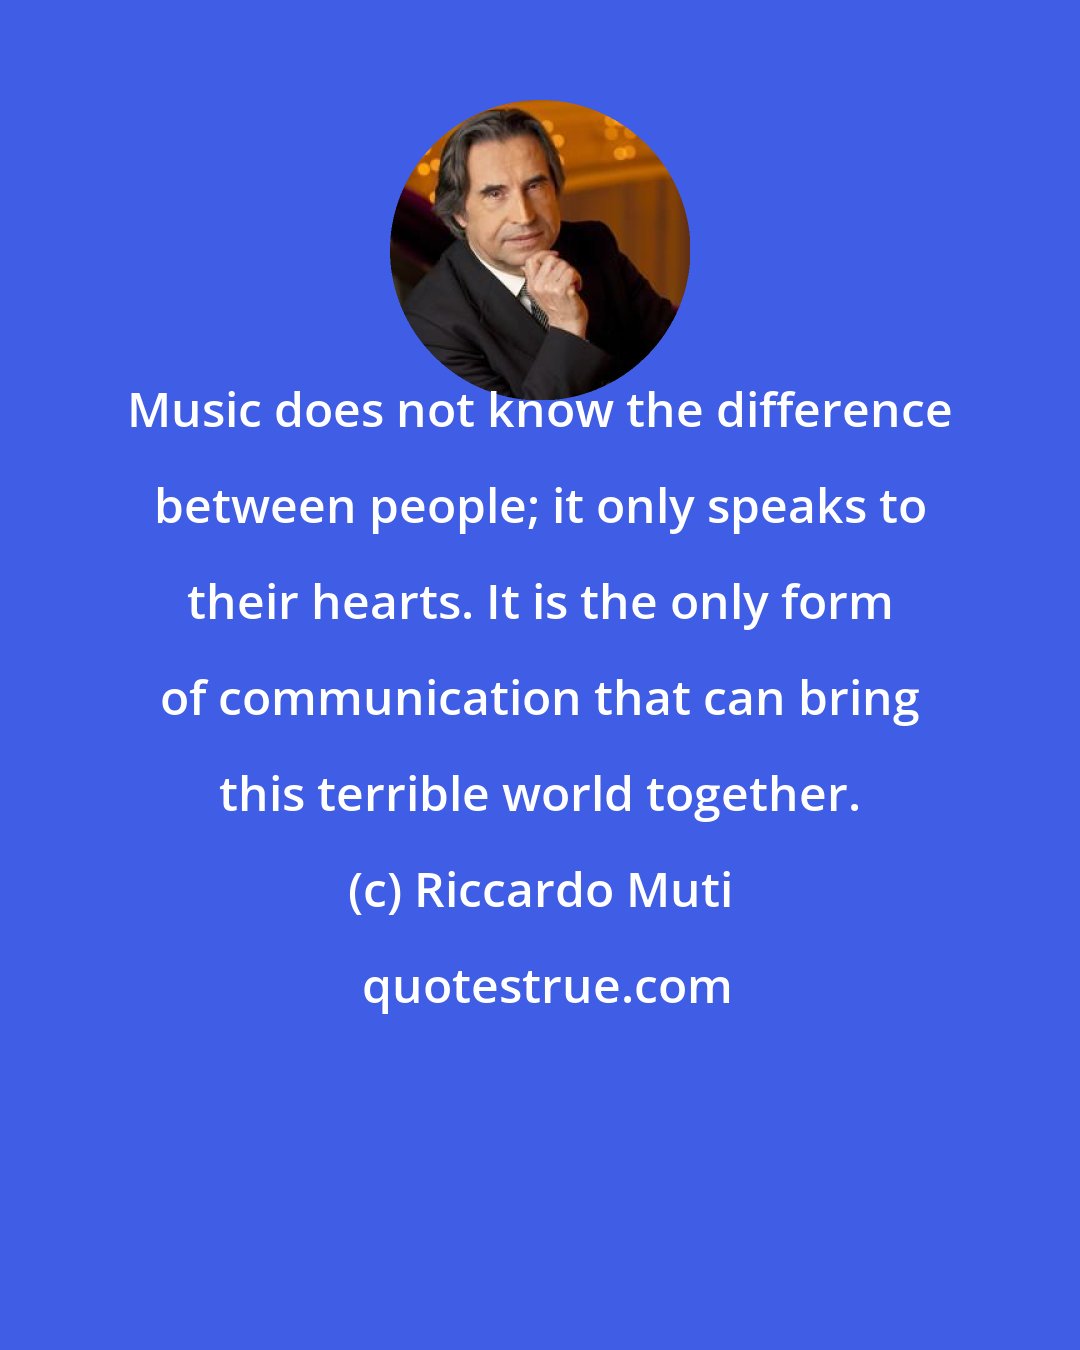 Riccardo Muti: Music does not know the difference between people; it only speaks to their hearts. It is the only form of communication that can bring this terrible world together.